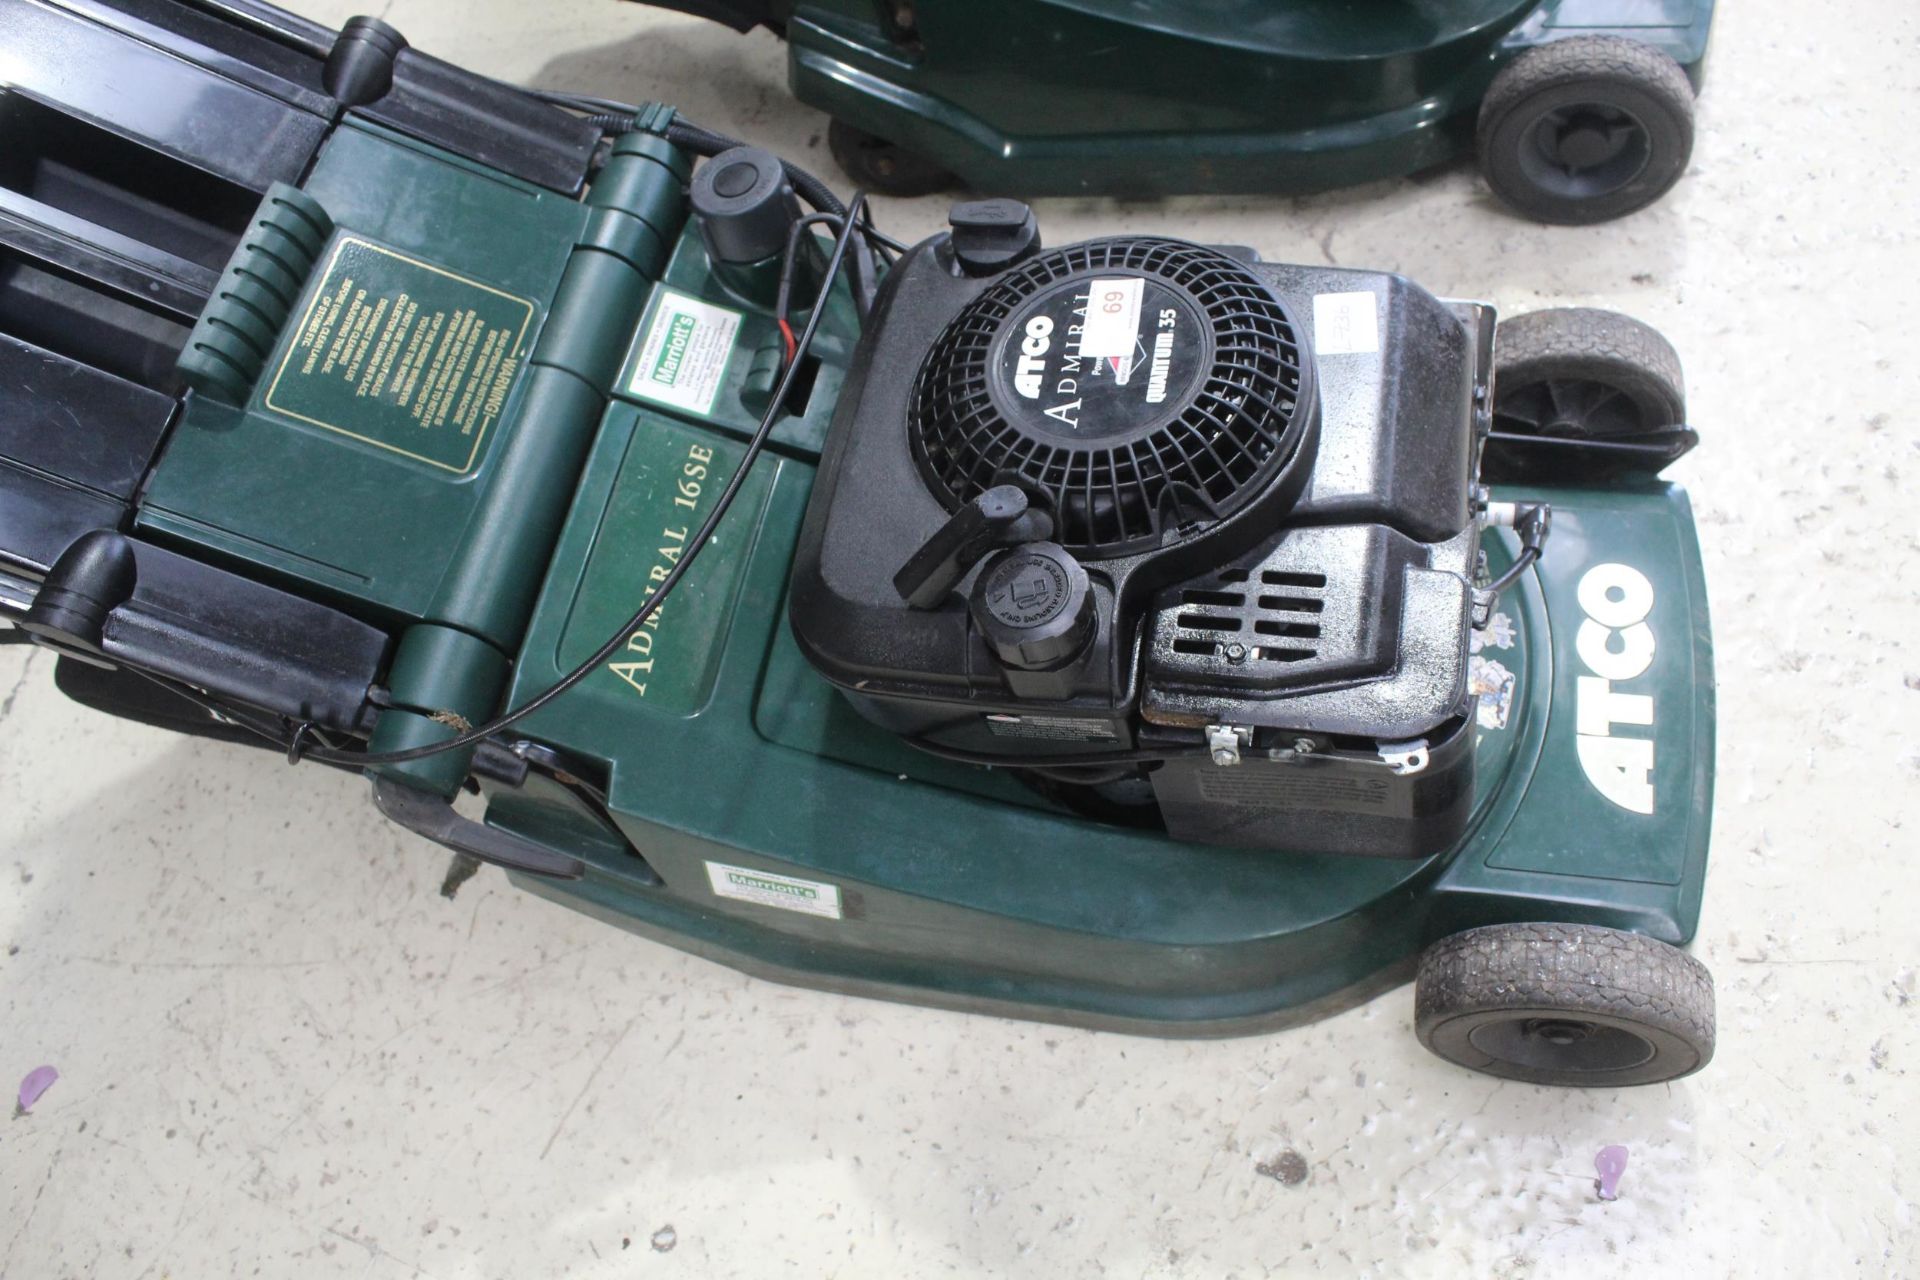 ATCO ADMIRAL 16 LAWN MOWER + VAT - Image 2 of 2